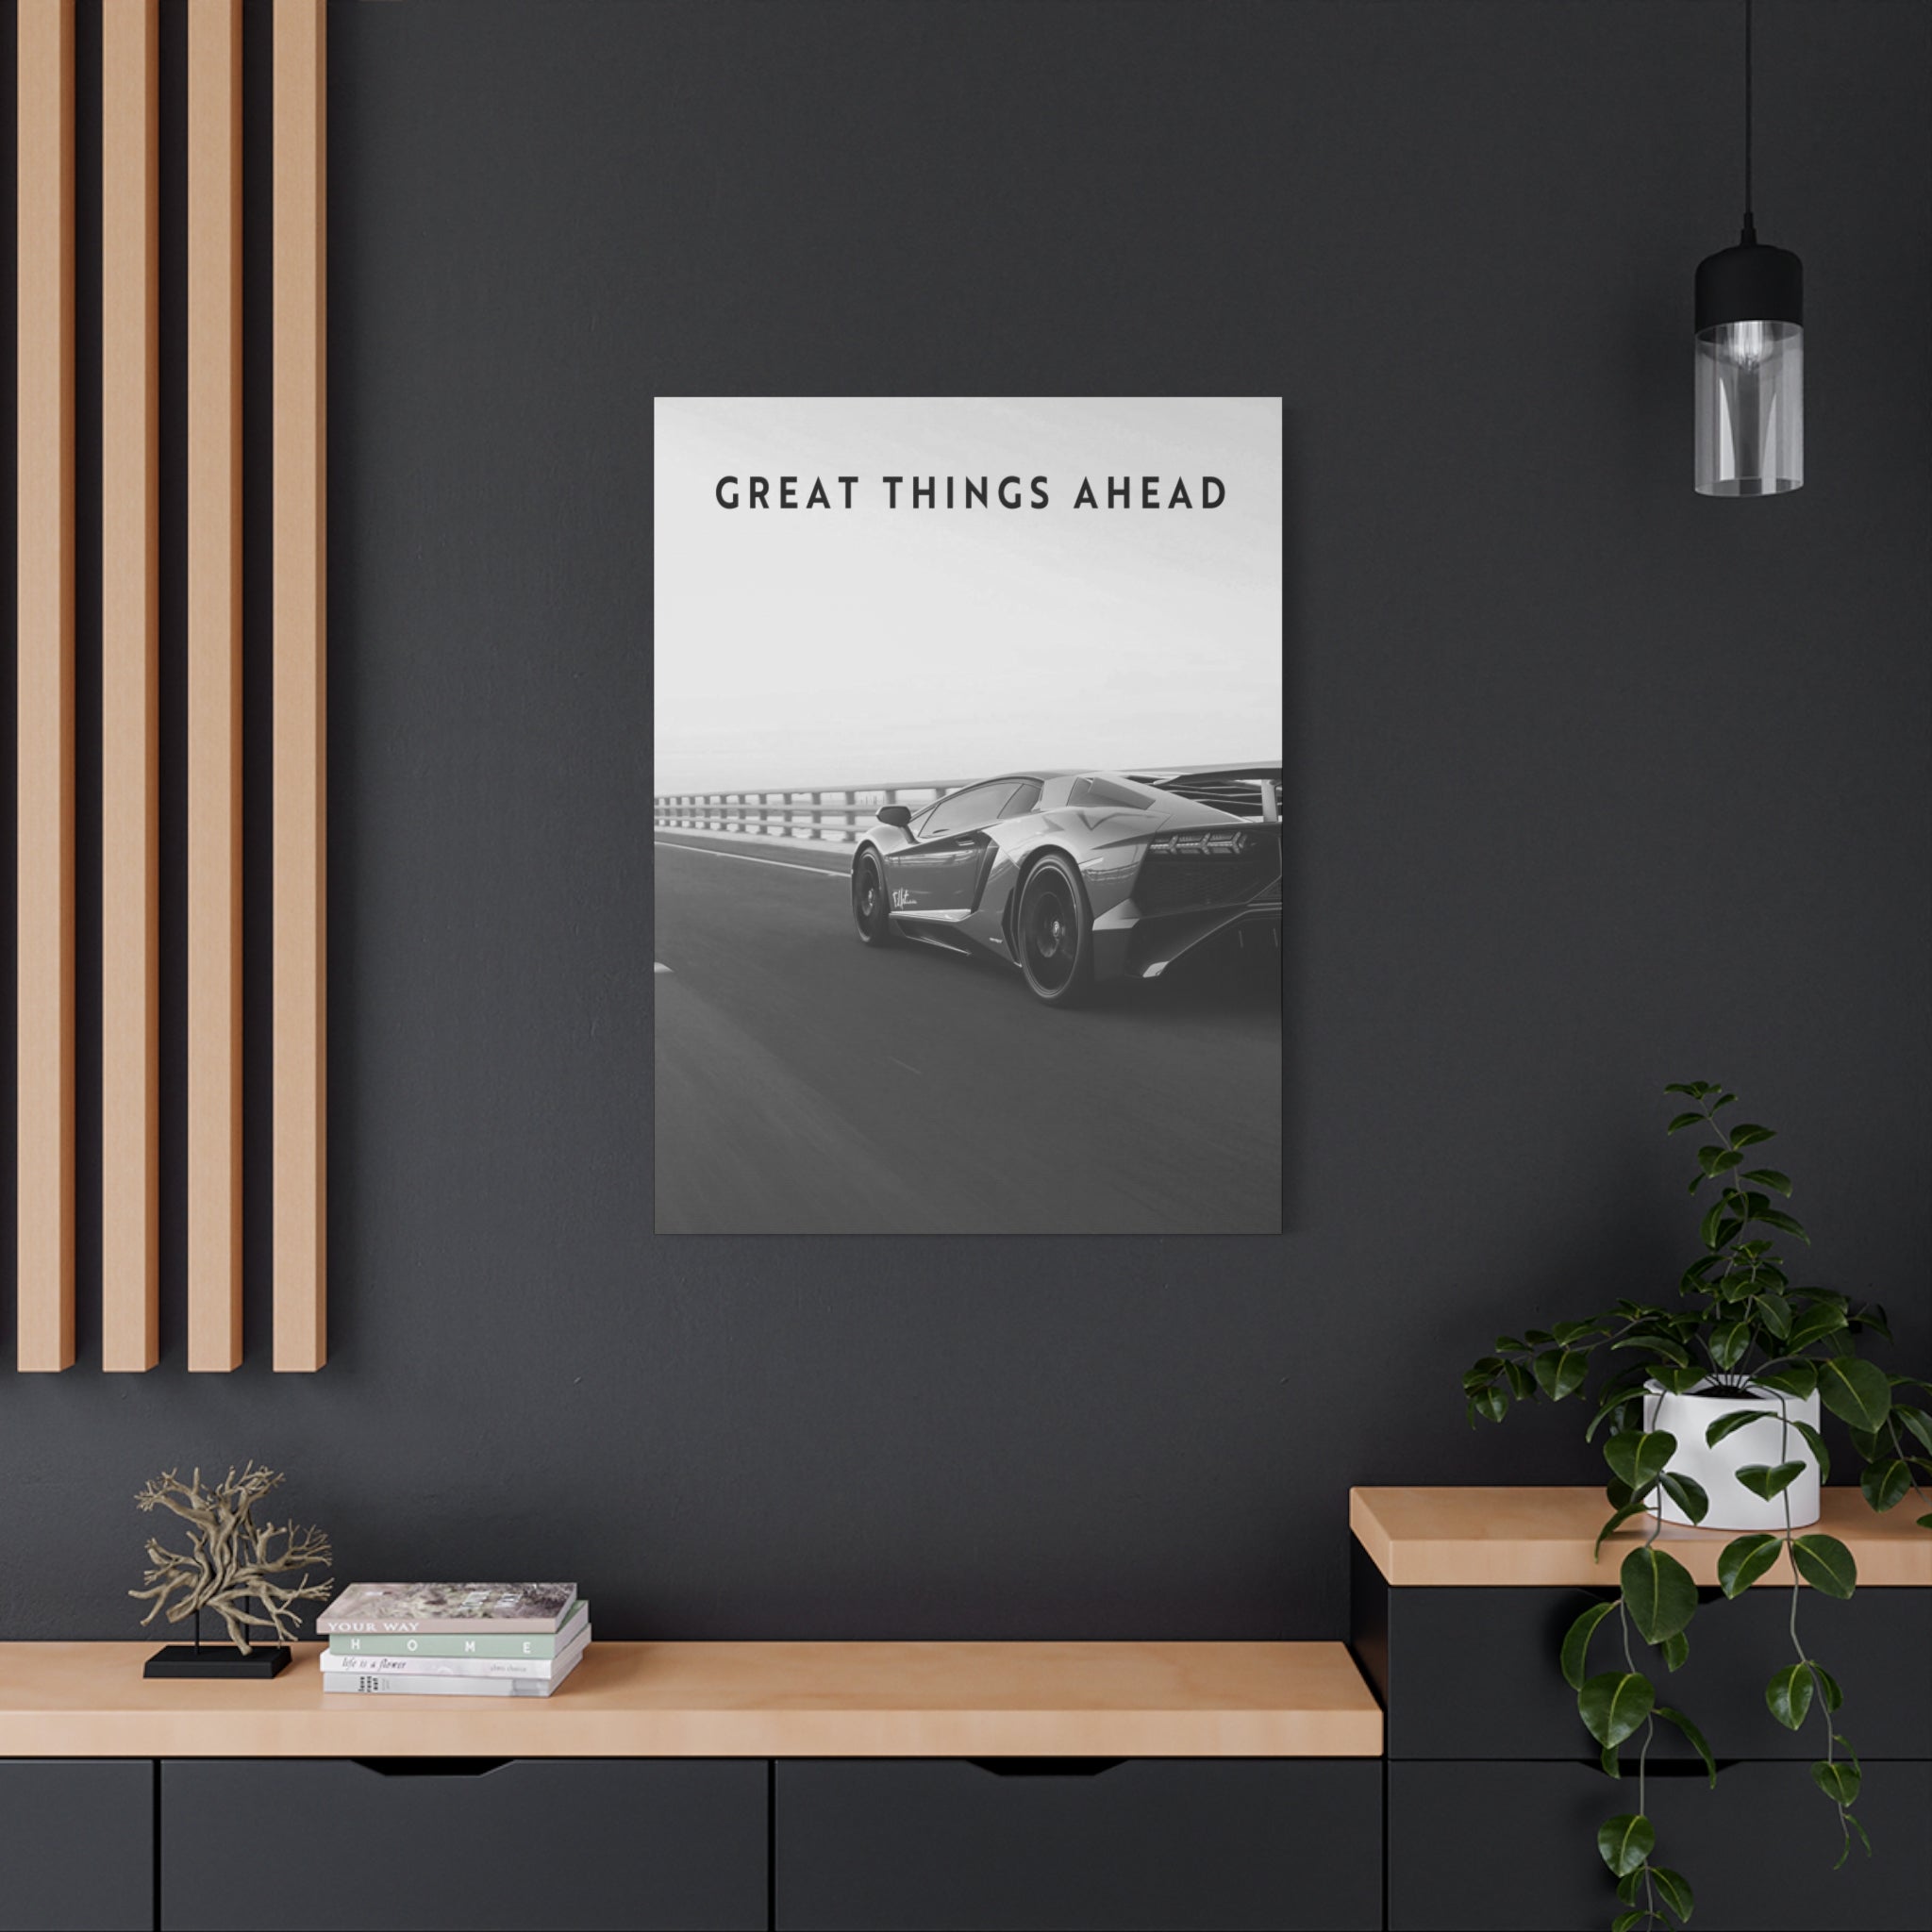 Great Things Ahead - Sports Car Black And White - Wall Art additional image 4